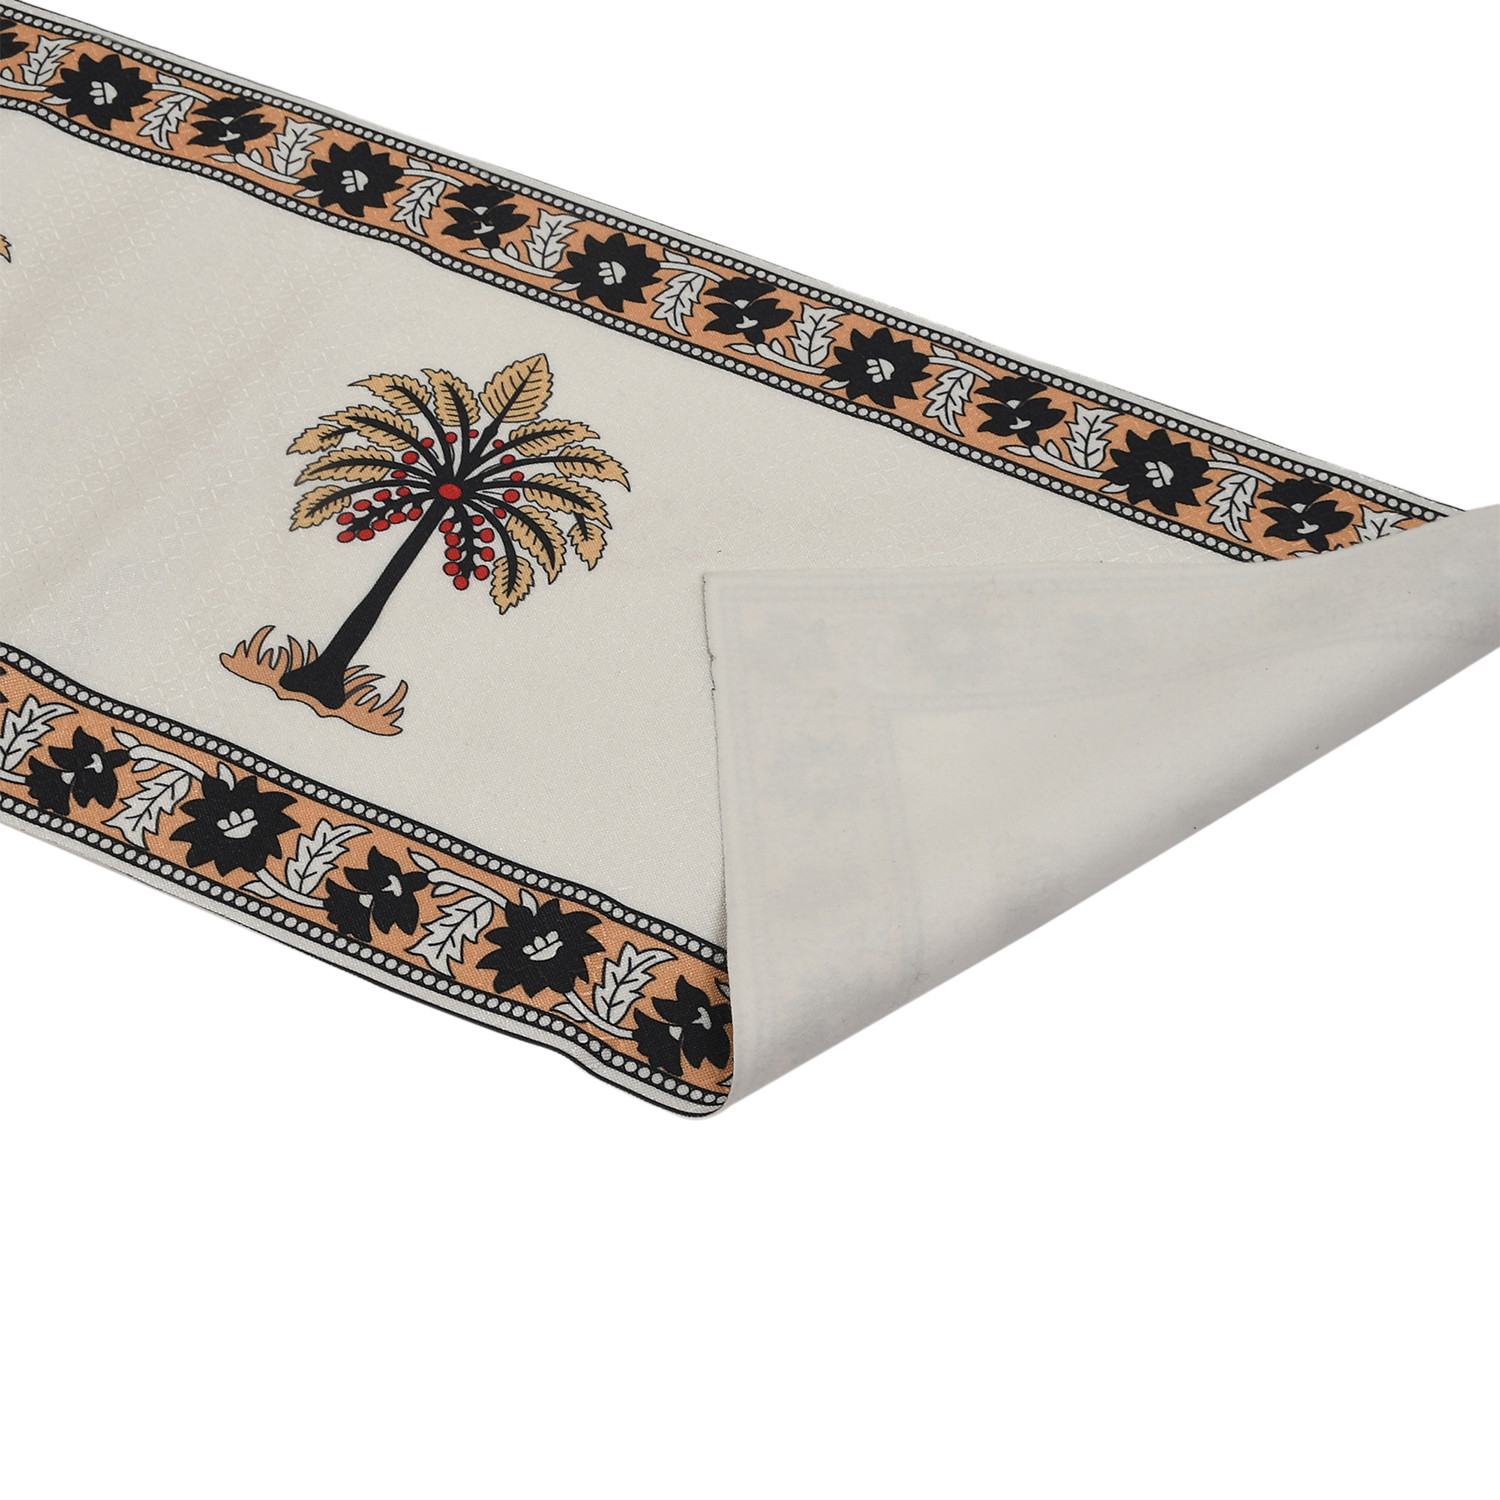 Kuber Industries Rich Fabric Table Runner & Placemats For Living, Dinning, Office, Kitchen & Wedding Set of 7 (Brown) 54KM4149